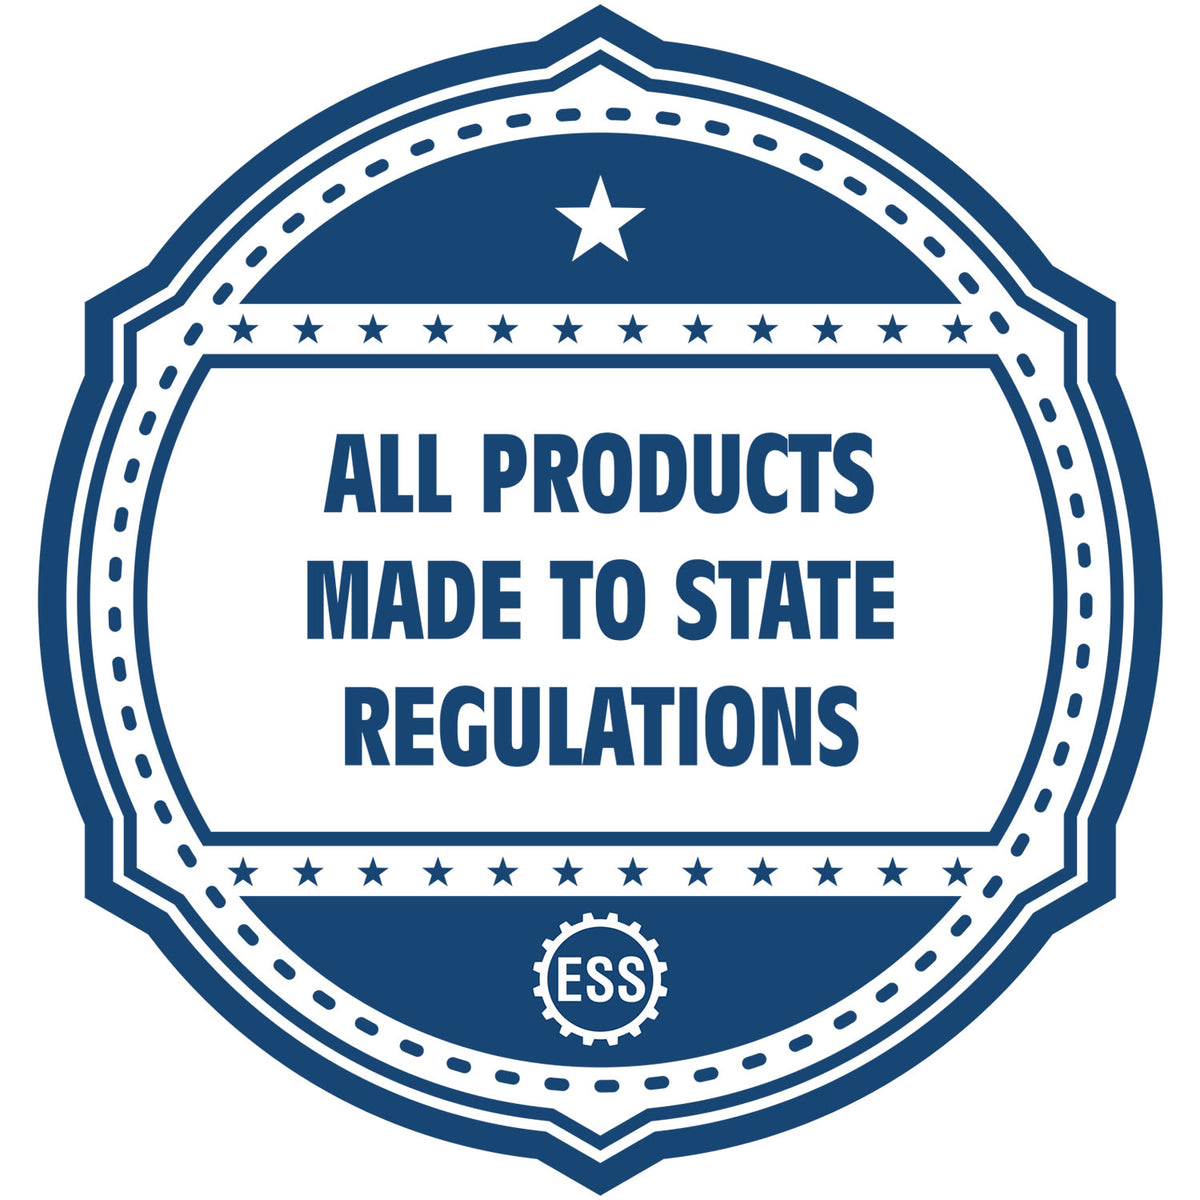 An icon or badge element for the Digital Maine PE Stamp and Electronic Seal for Maine Engineer showing that this product is made in compliance with state regulations.